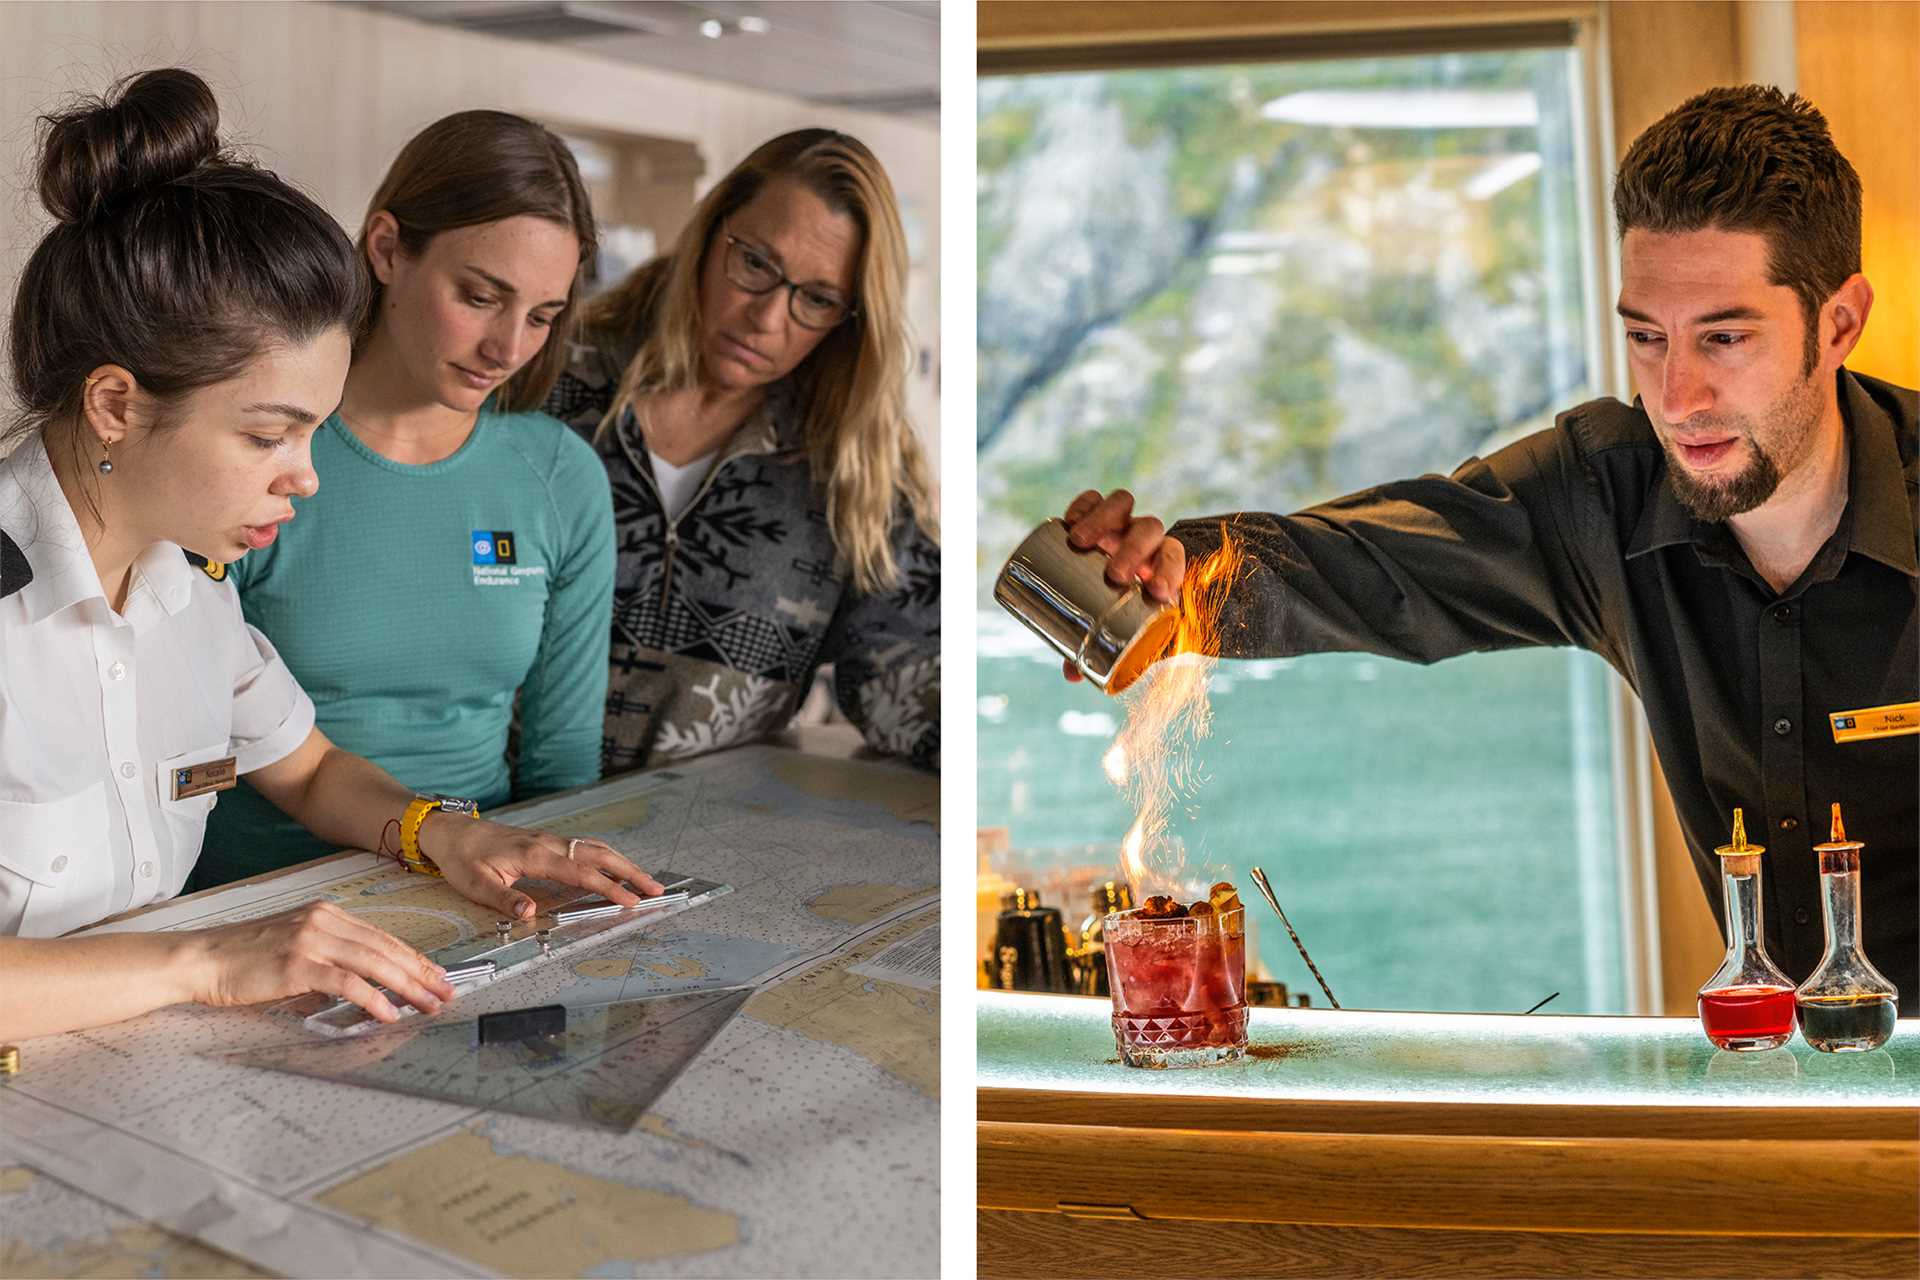 Left: Female crewmember from the National Geographic Resolution charts courses on a map while two female guests look on. Right: A male bartender garnishes a flaming cocktail.